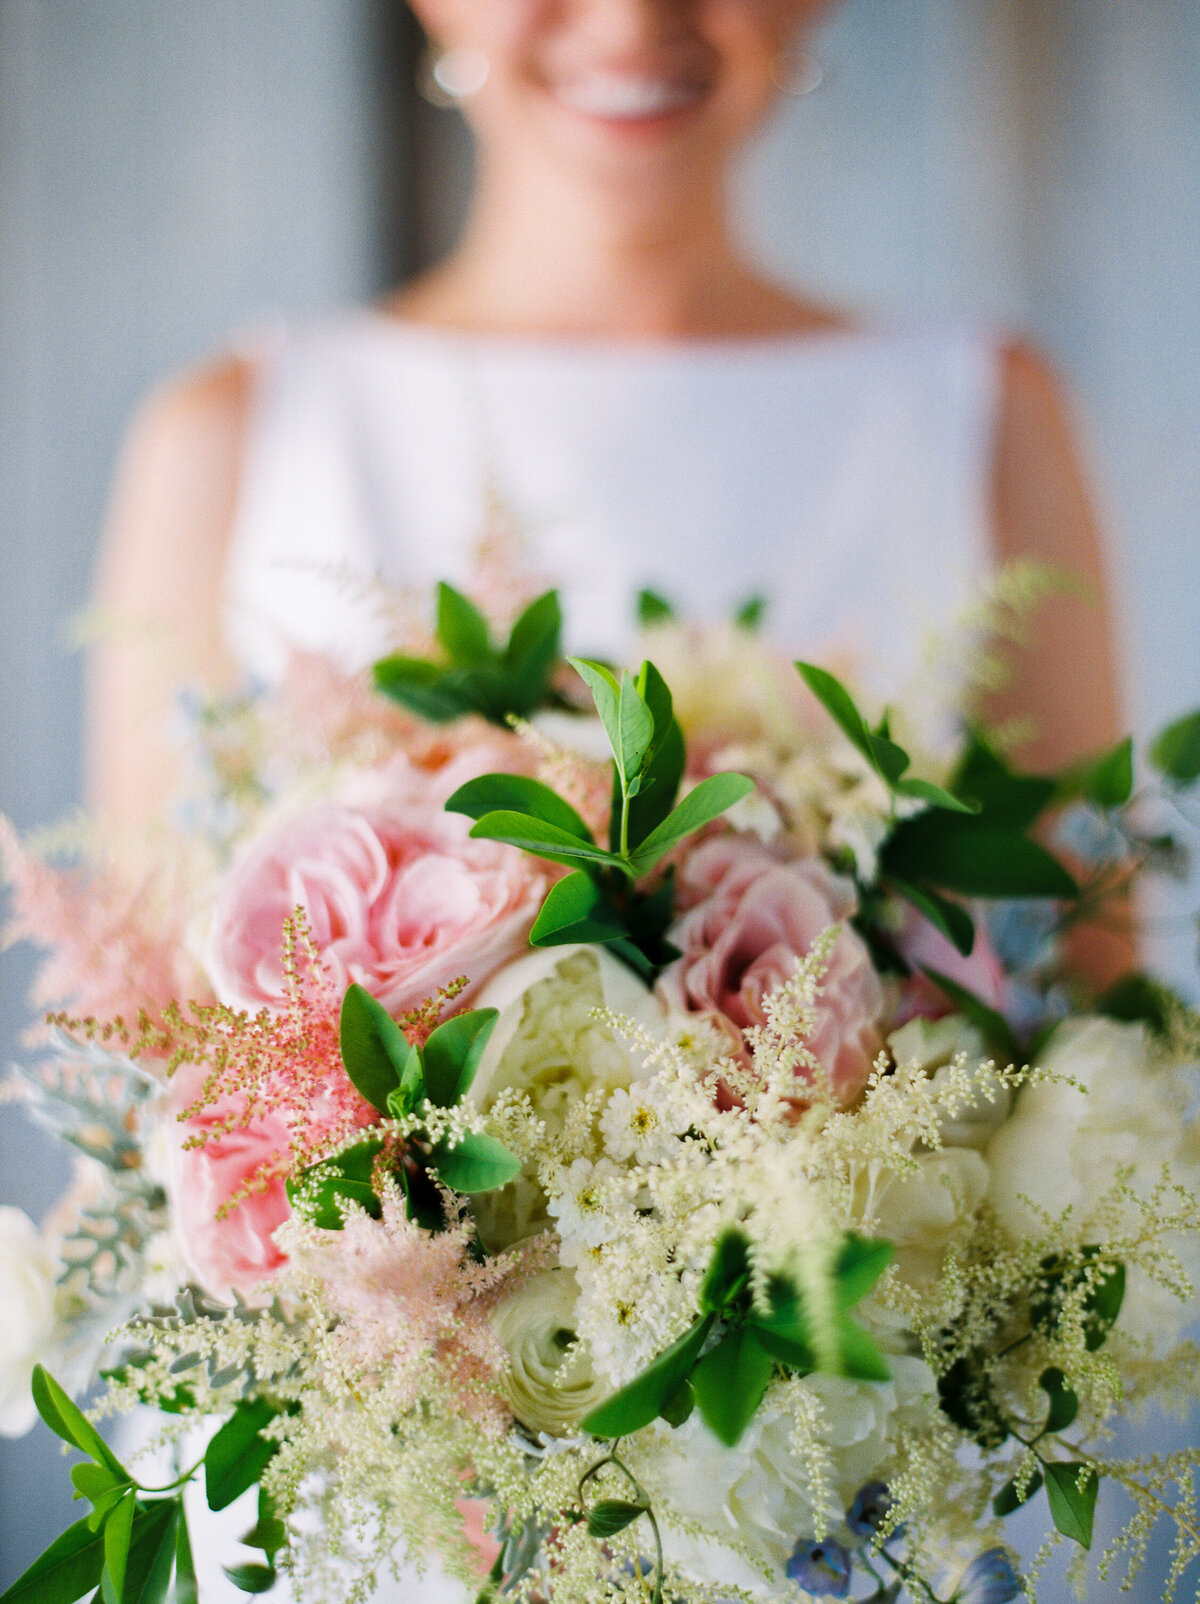 Close-up of a bride's pink, white and green bouquet